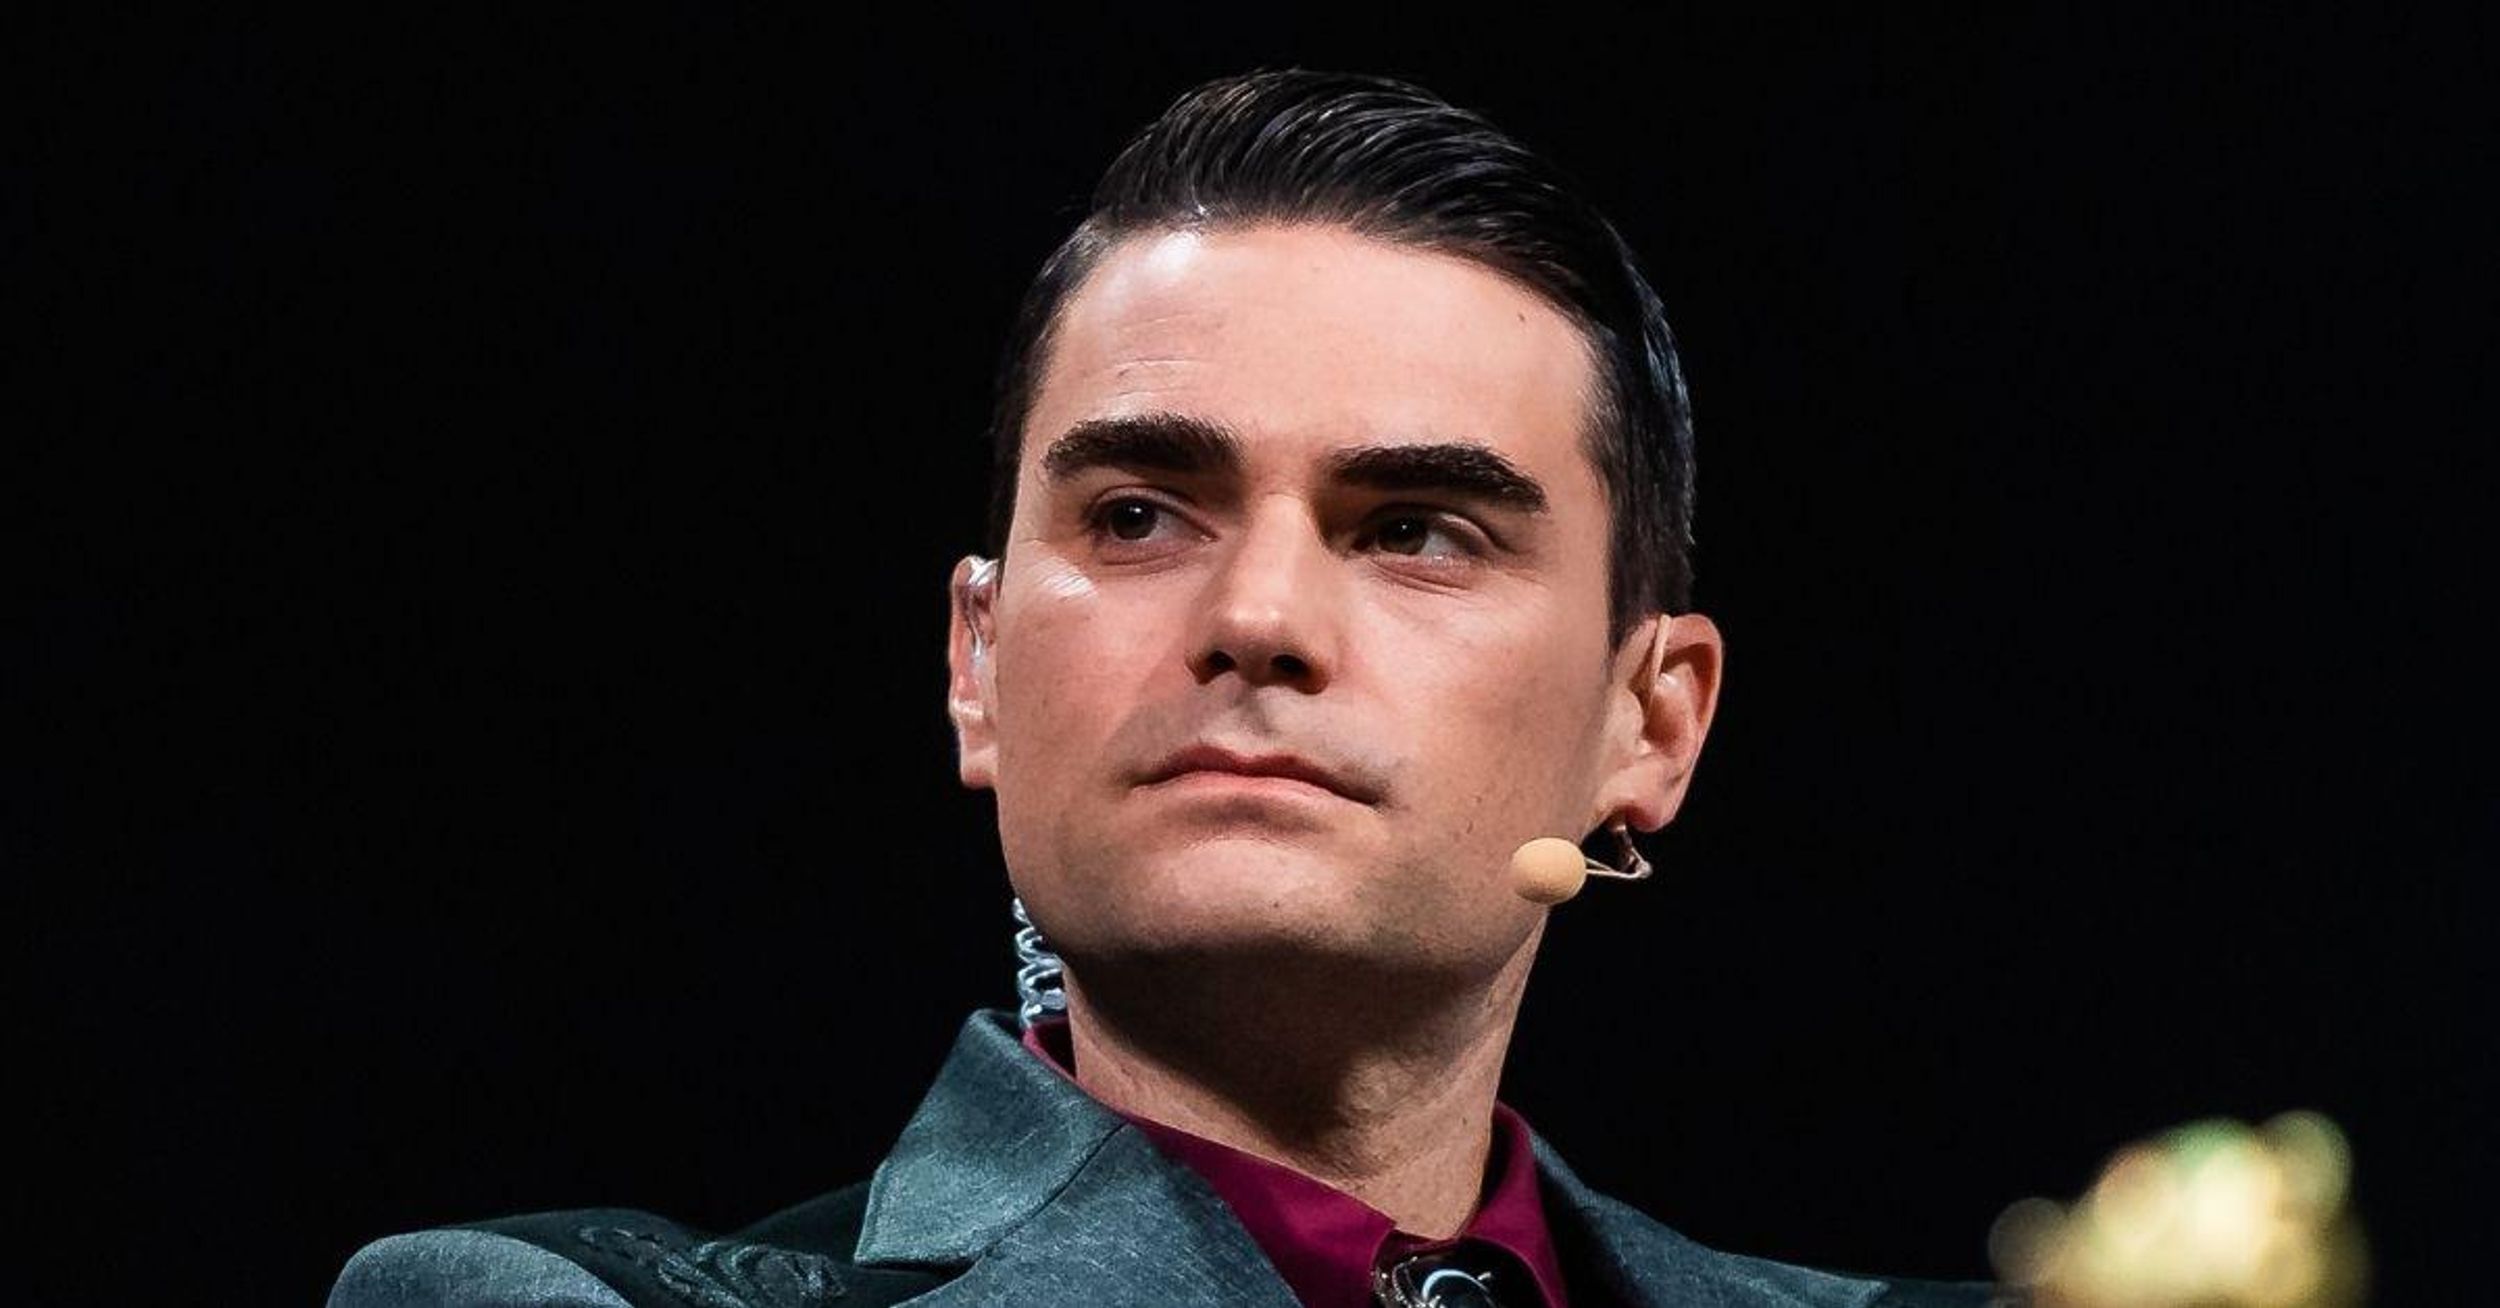 Twitter Roasts Ben Shapiro After He Appears To Come Out As Gay Thanks To Tweet's Poor Grammar